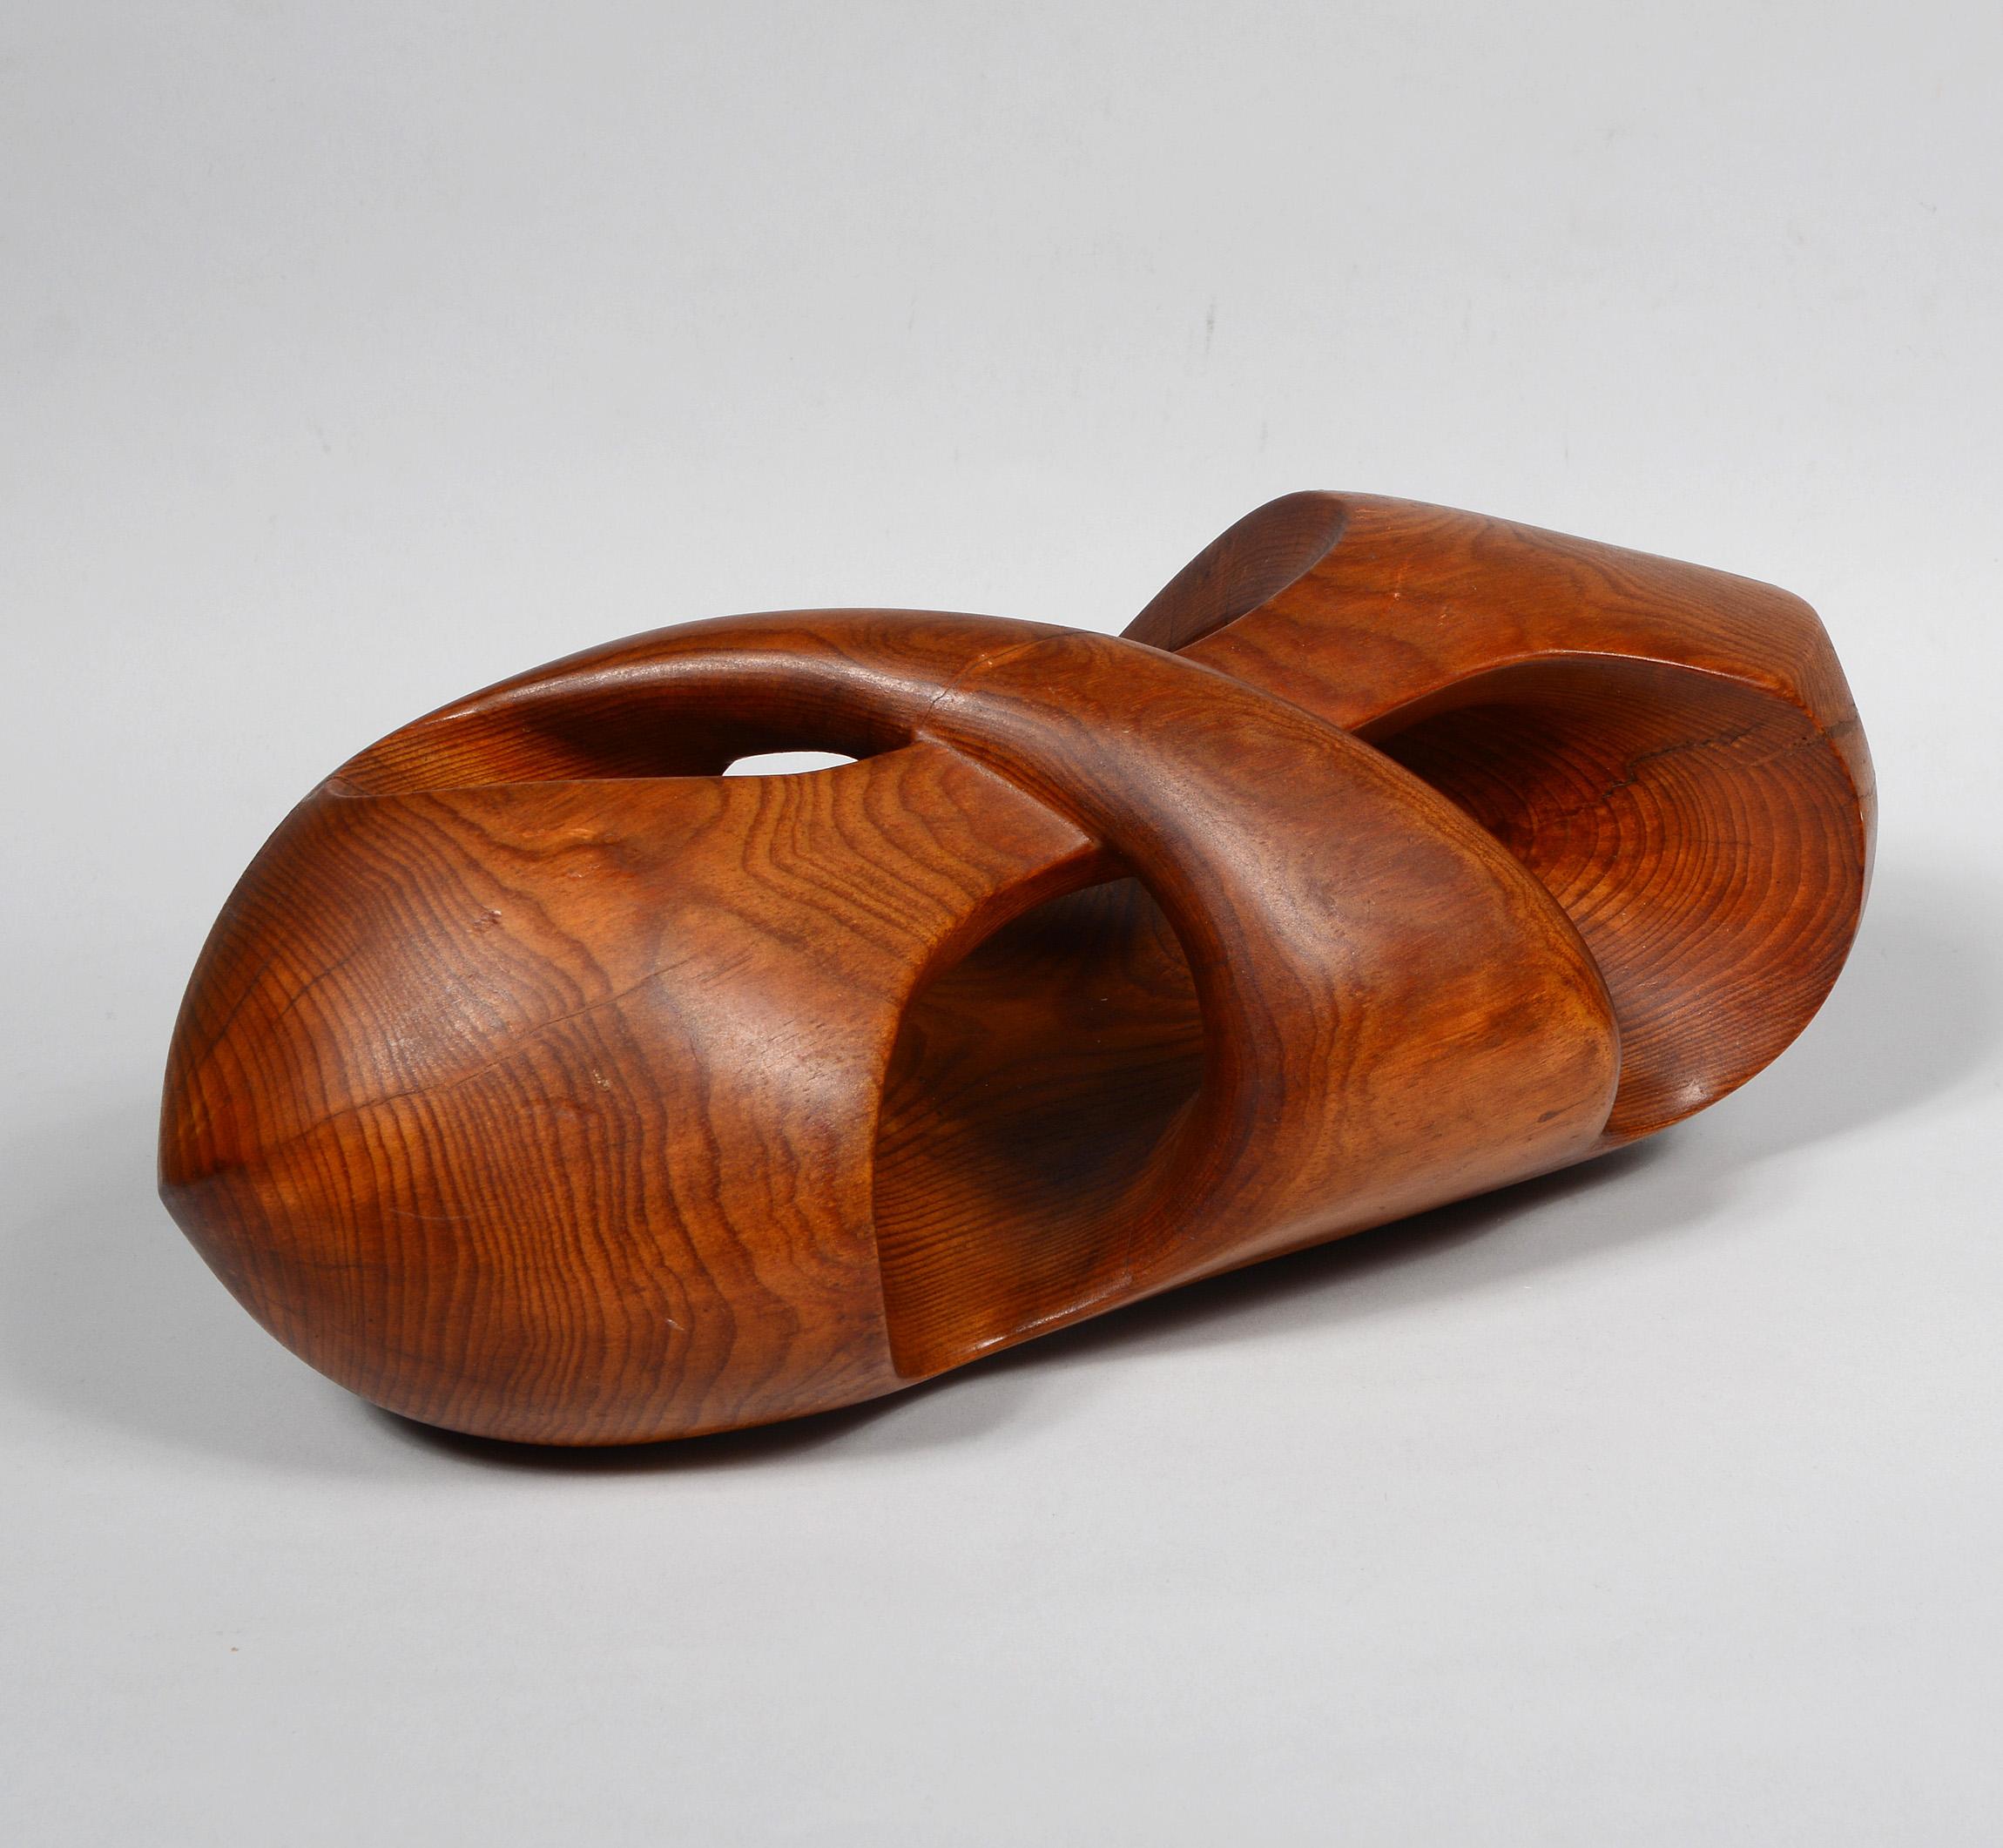 Carved wood abstract sculpture in the form of a knot. This is from the 1950s-1960s. This is one of a small group of these sculptures by an anonymous artist we acquired. It is not signed.